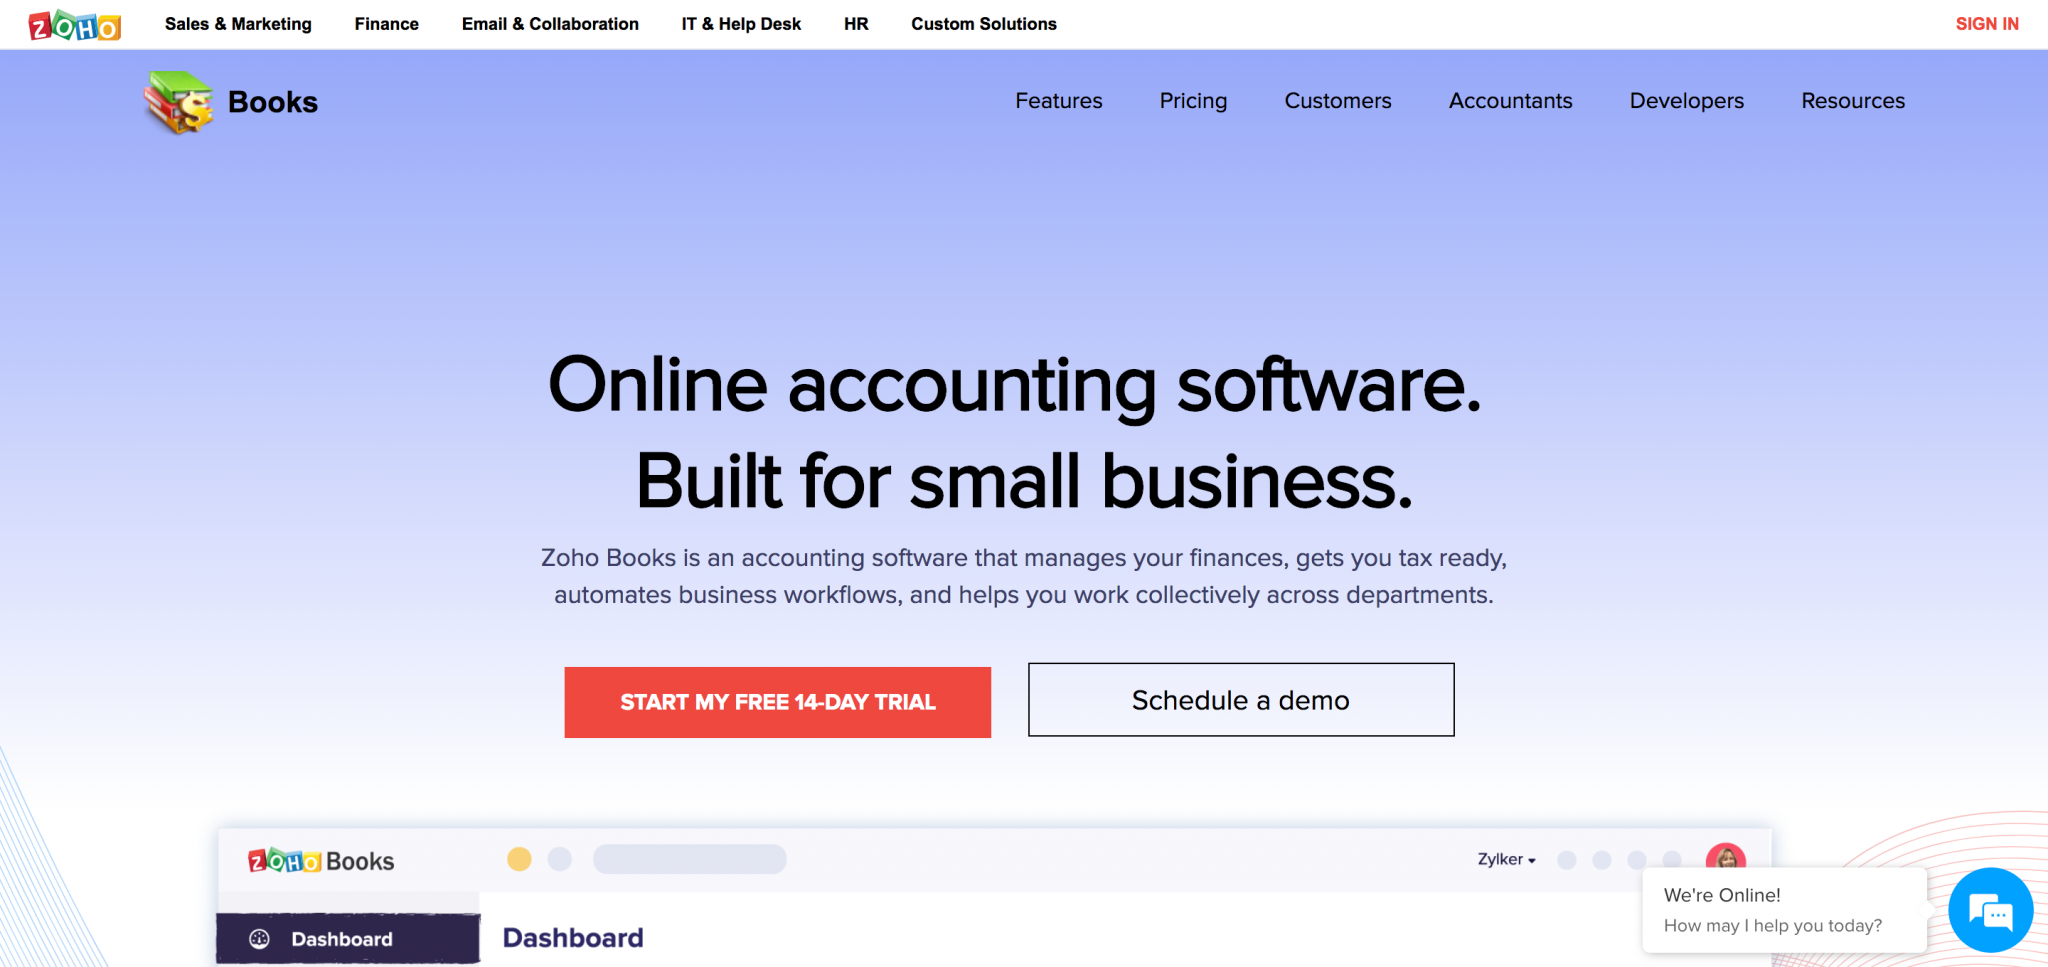 Online Accounting Software for Small Businesses